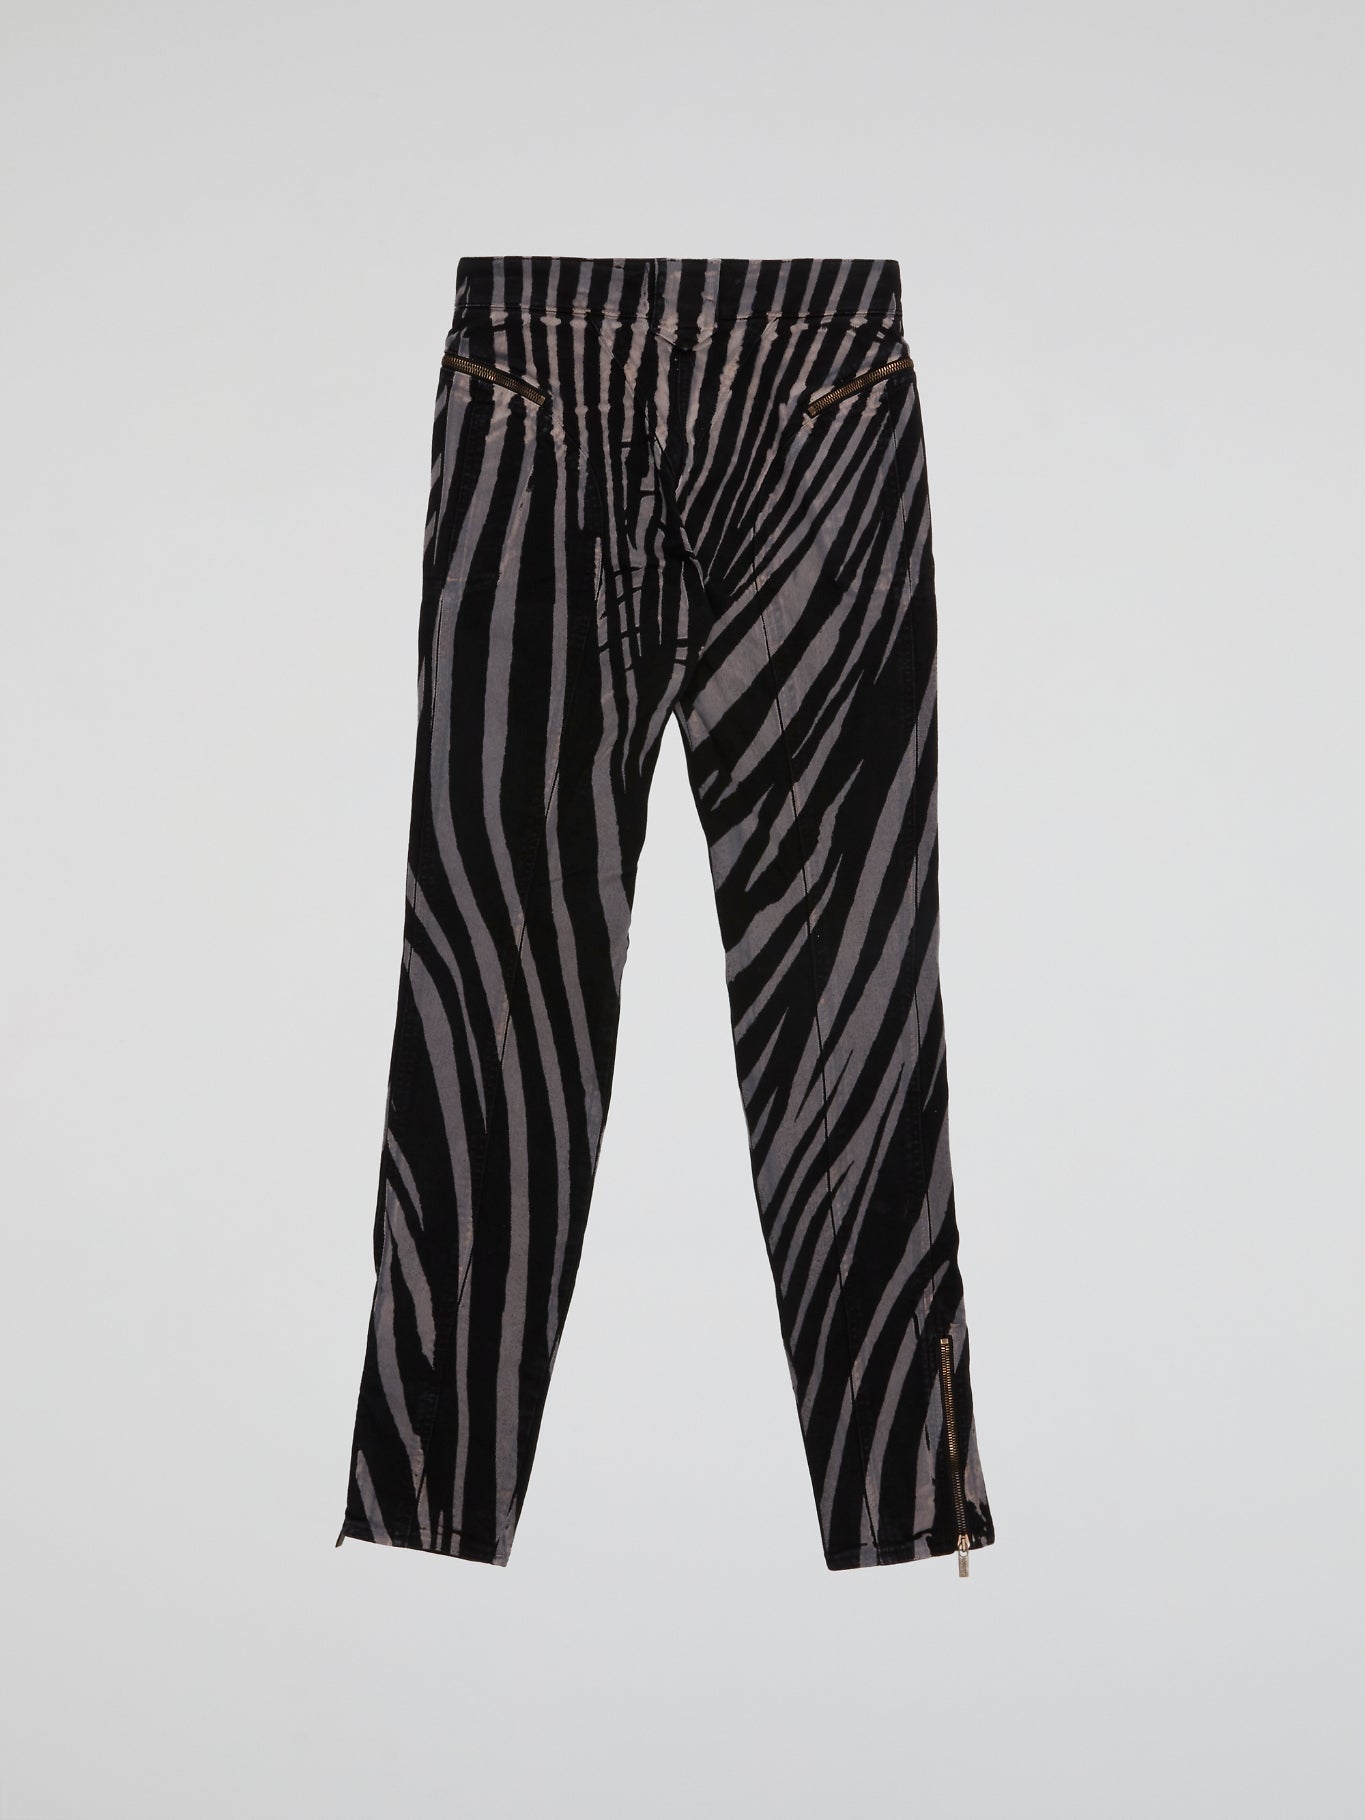 Step into the wild side with these Zebra Print Trousers by Roberto Cavalli and let your fashion roar! Crafted from luxurious fabric, these trendy trousers feature the iconic zebra print, adding a touch of untamed elegance to your wardrobe. Whether paired with a bold blazer or a simple blouse, these trousers are bound to make a fierce fashion statement wherever you go.